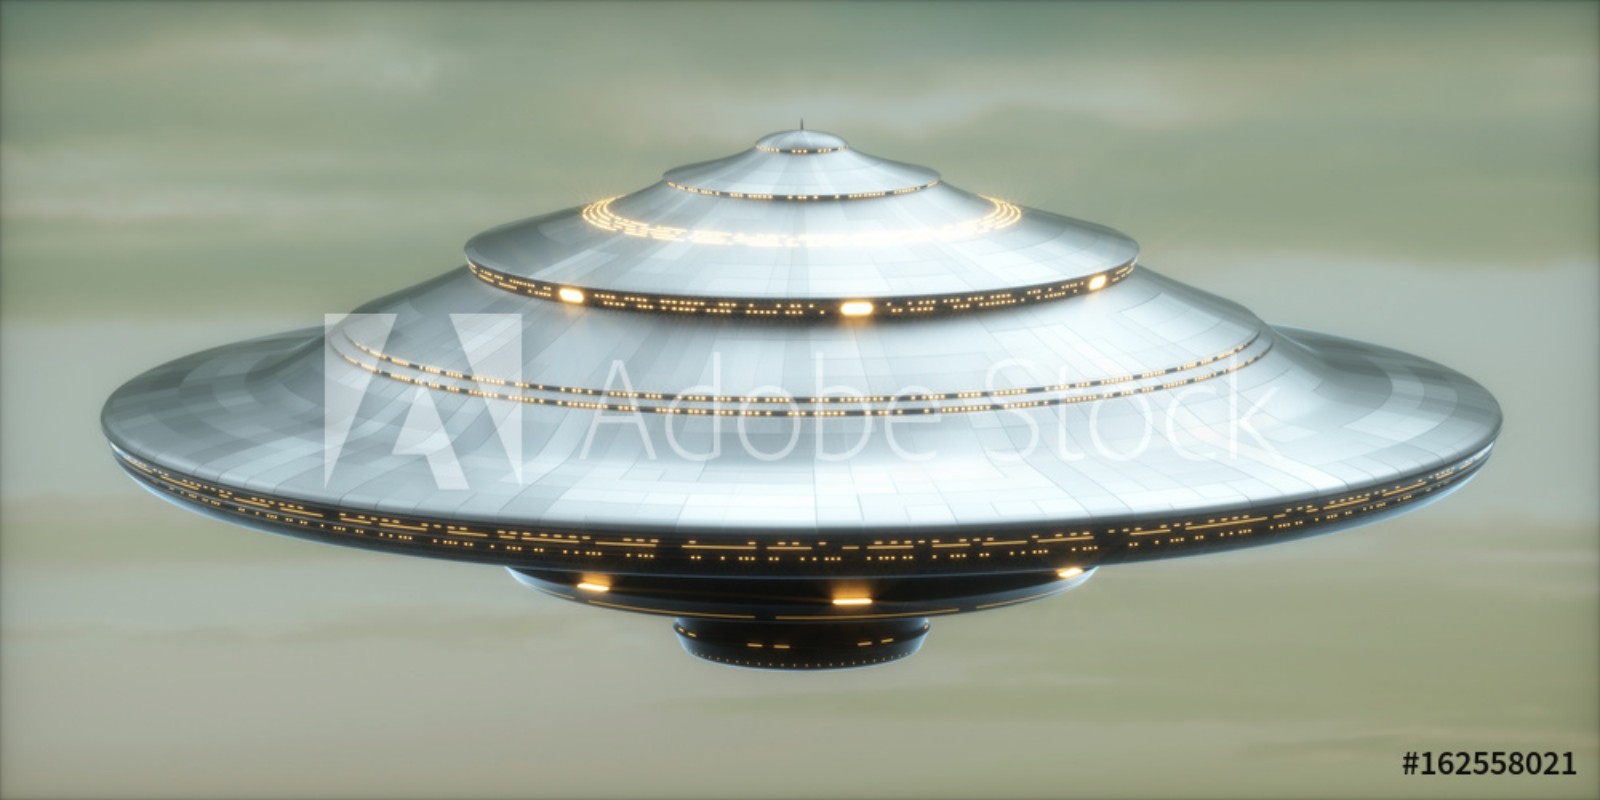 Image de UFO Alien Spaceship  Clipping Path Included